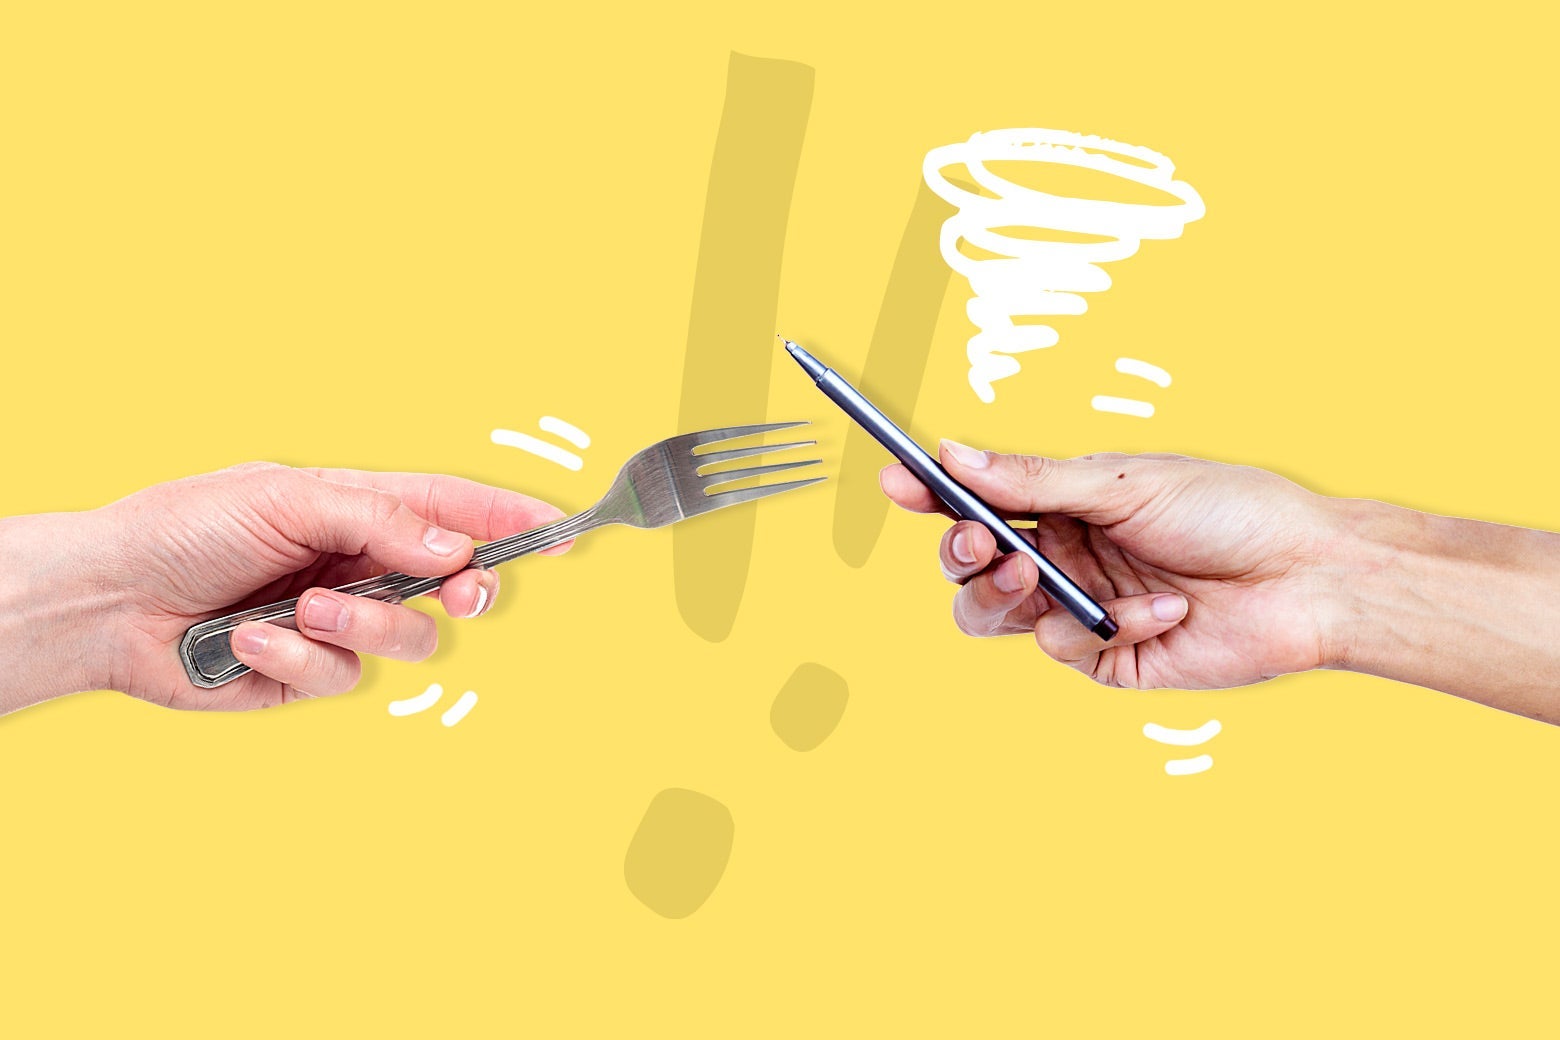 A hand holding a fork and a hand holding a pen dueling it out.